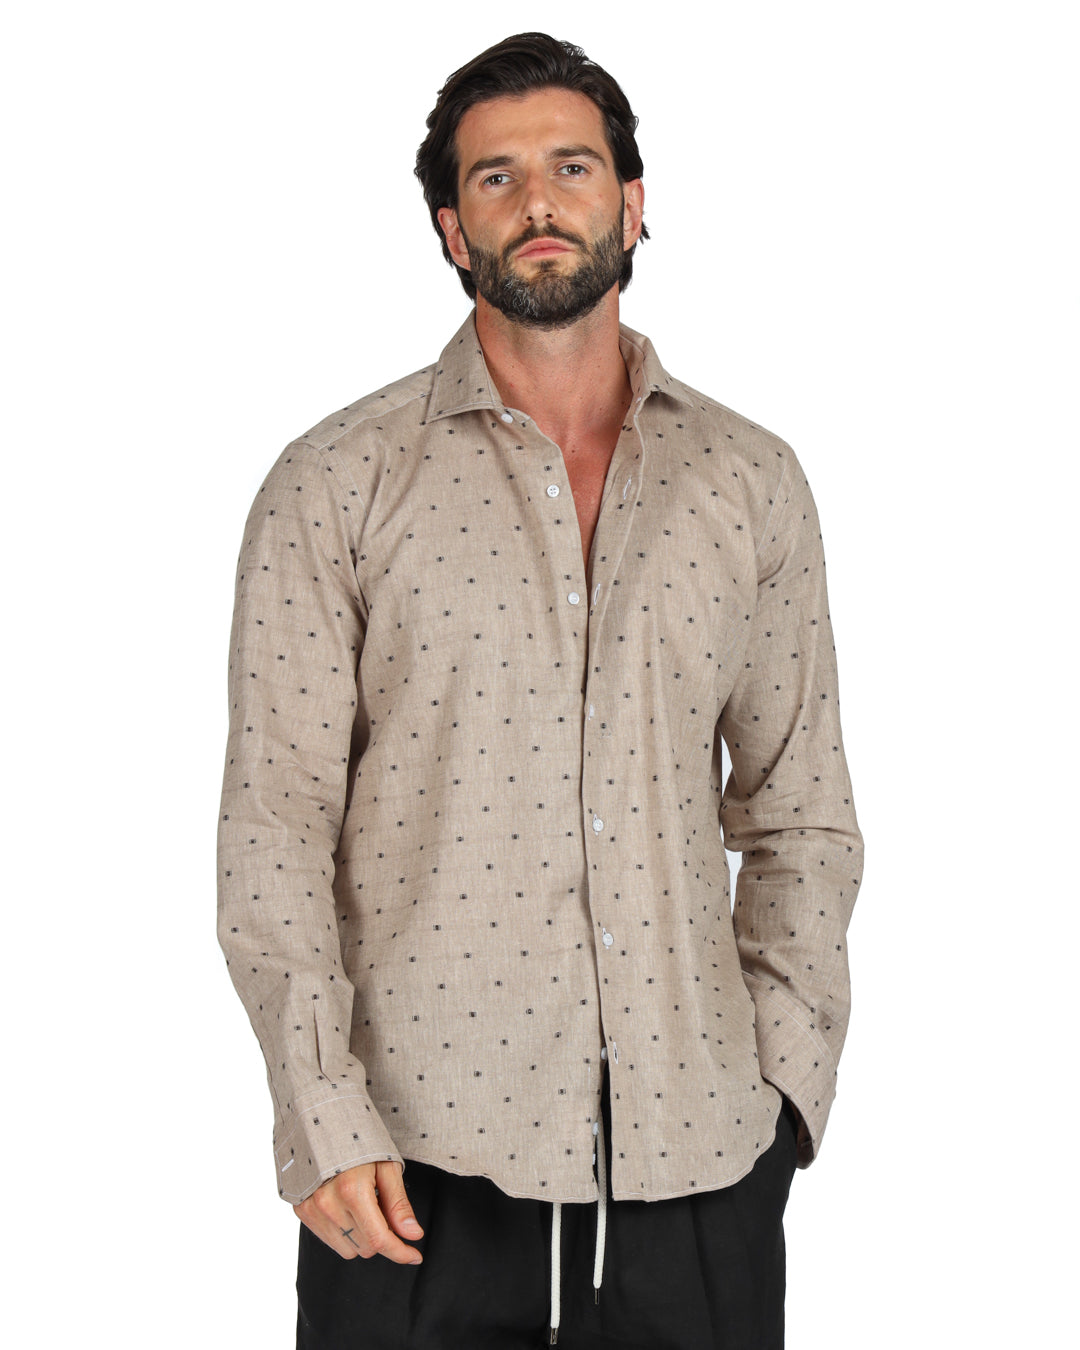 Salina - Classic mud shirt with brown linen embroidery